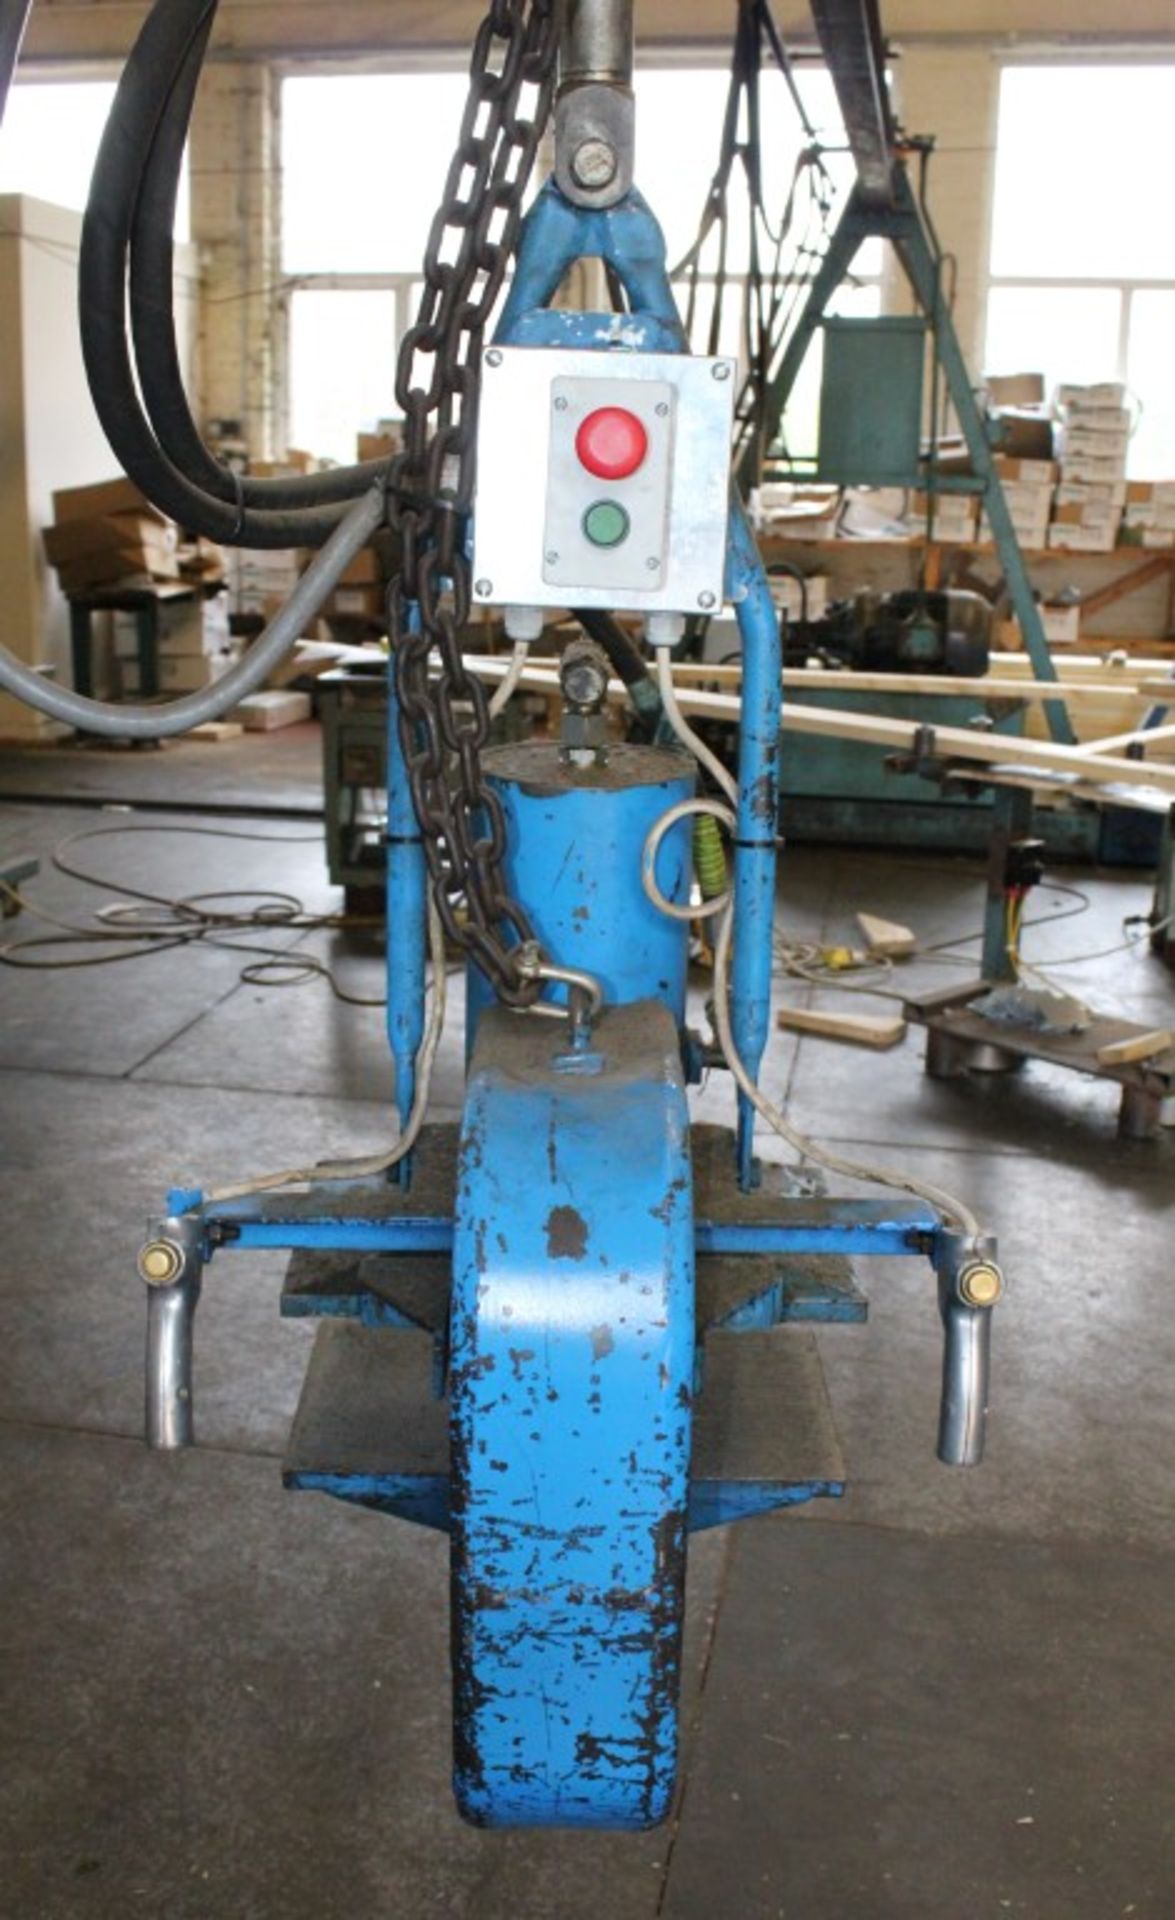 1 x Roof Trus Fabrication Press With Press Head - 3 Phase - Length 700cm Height 252cm - Working - Image 9 of 12